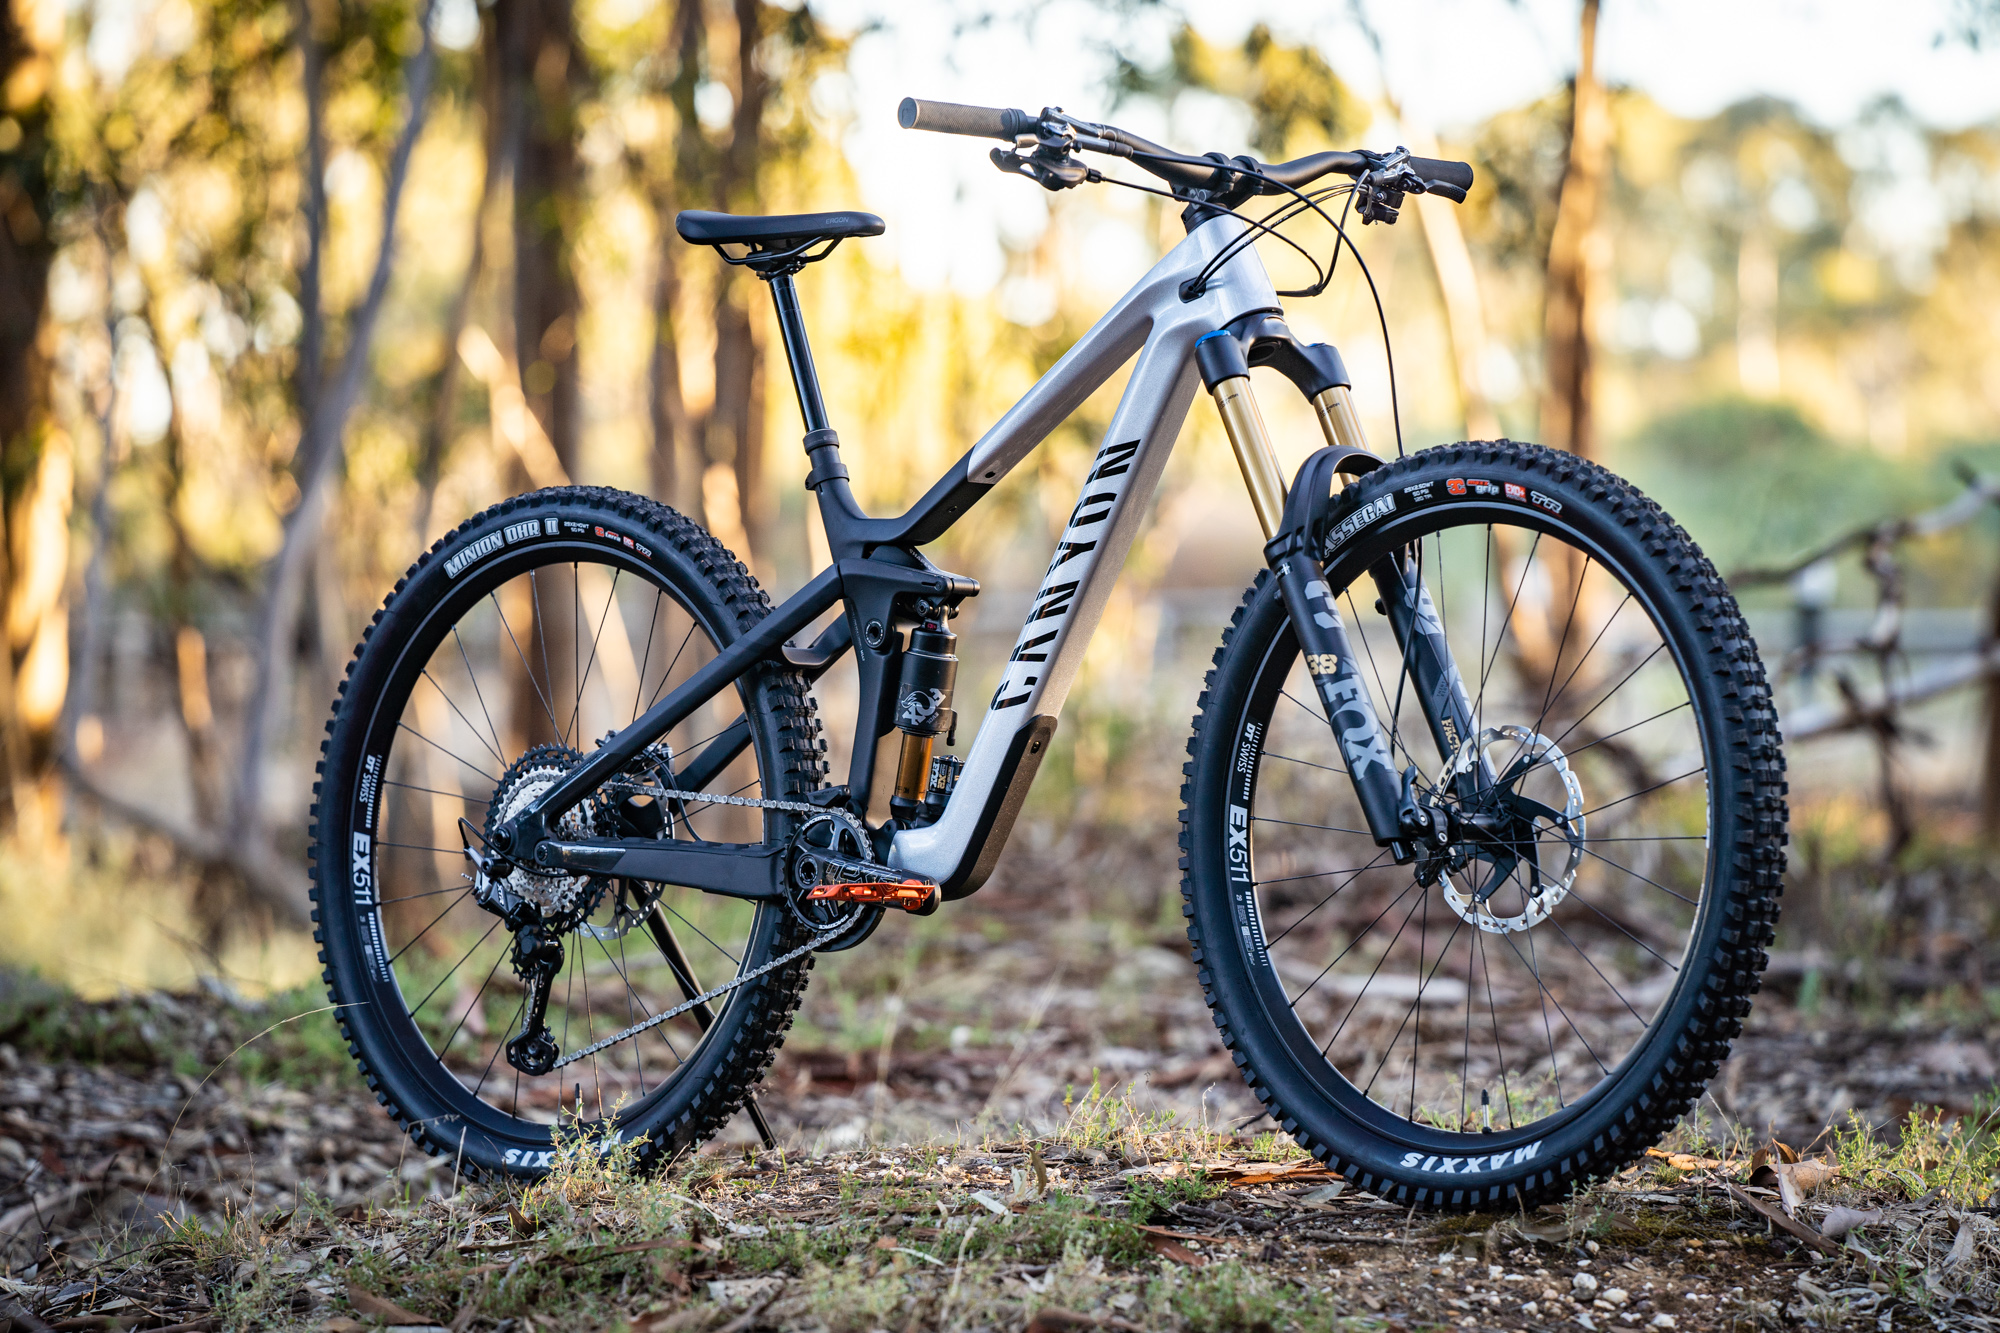 The Canyon Strive is a proven contender for the best enduro mountain bike